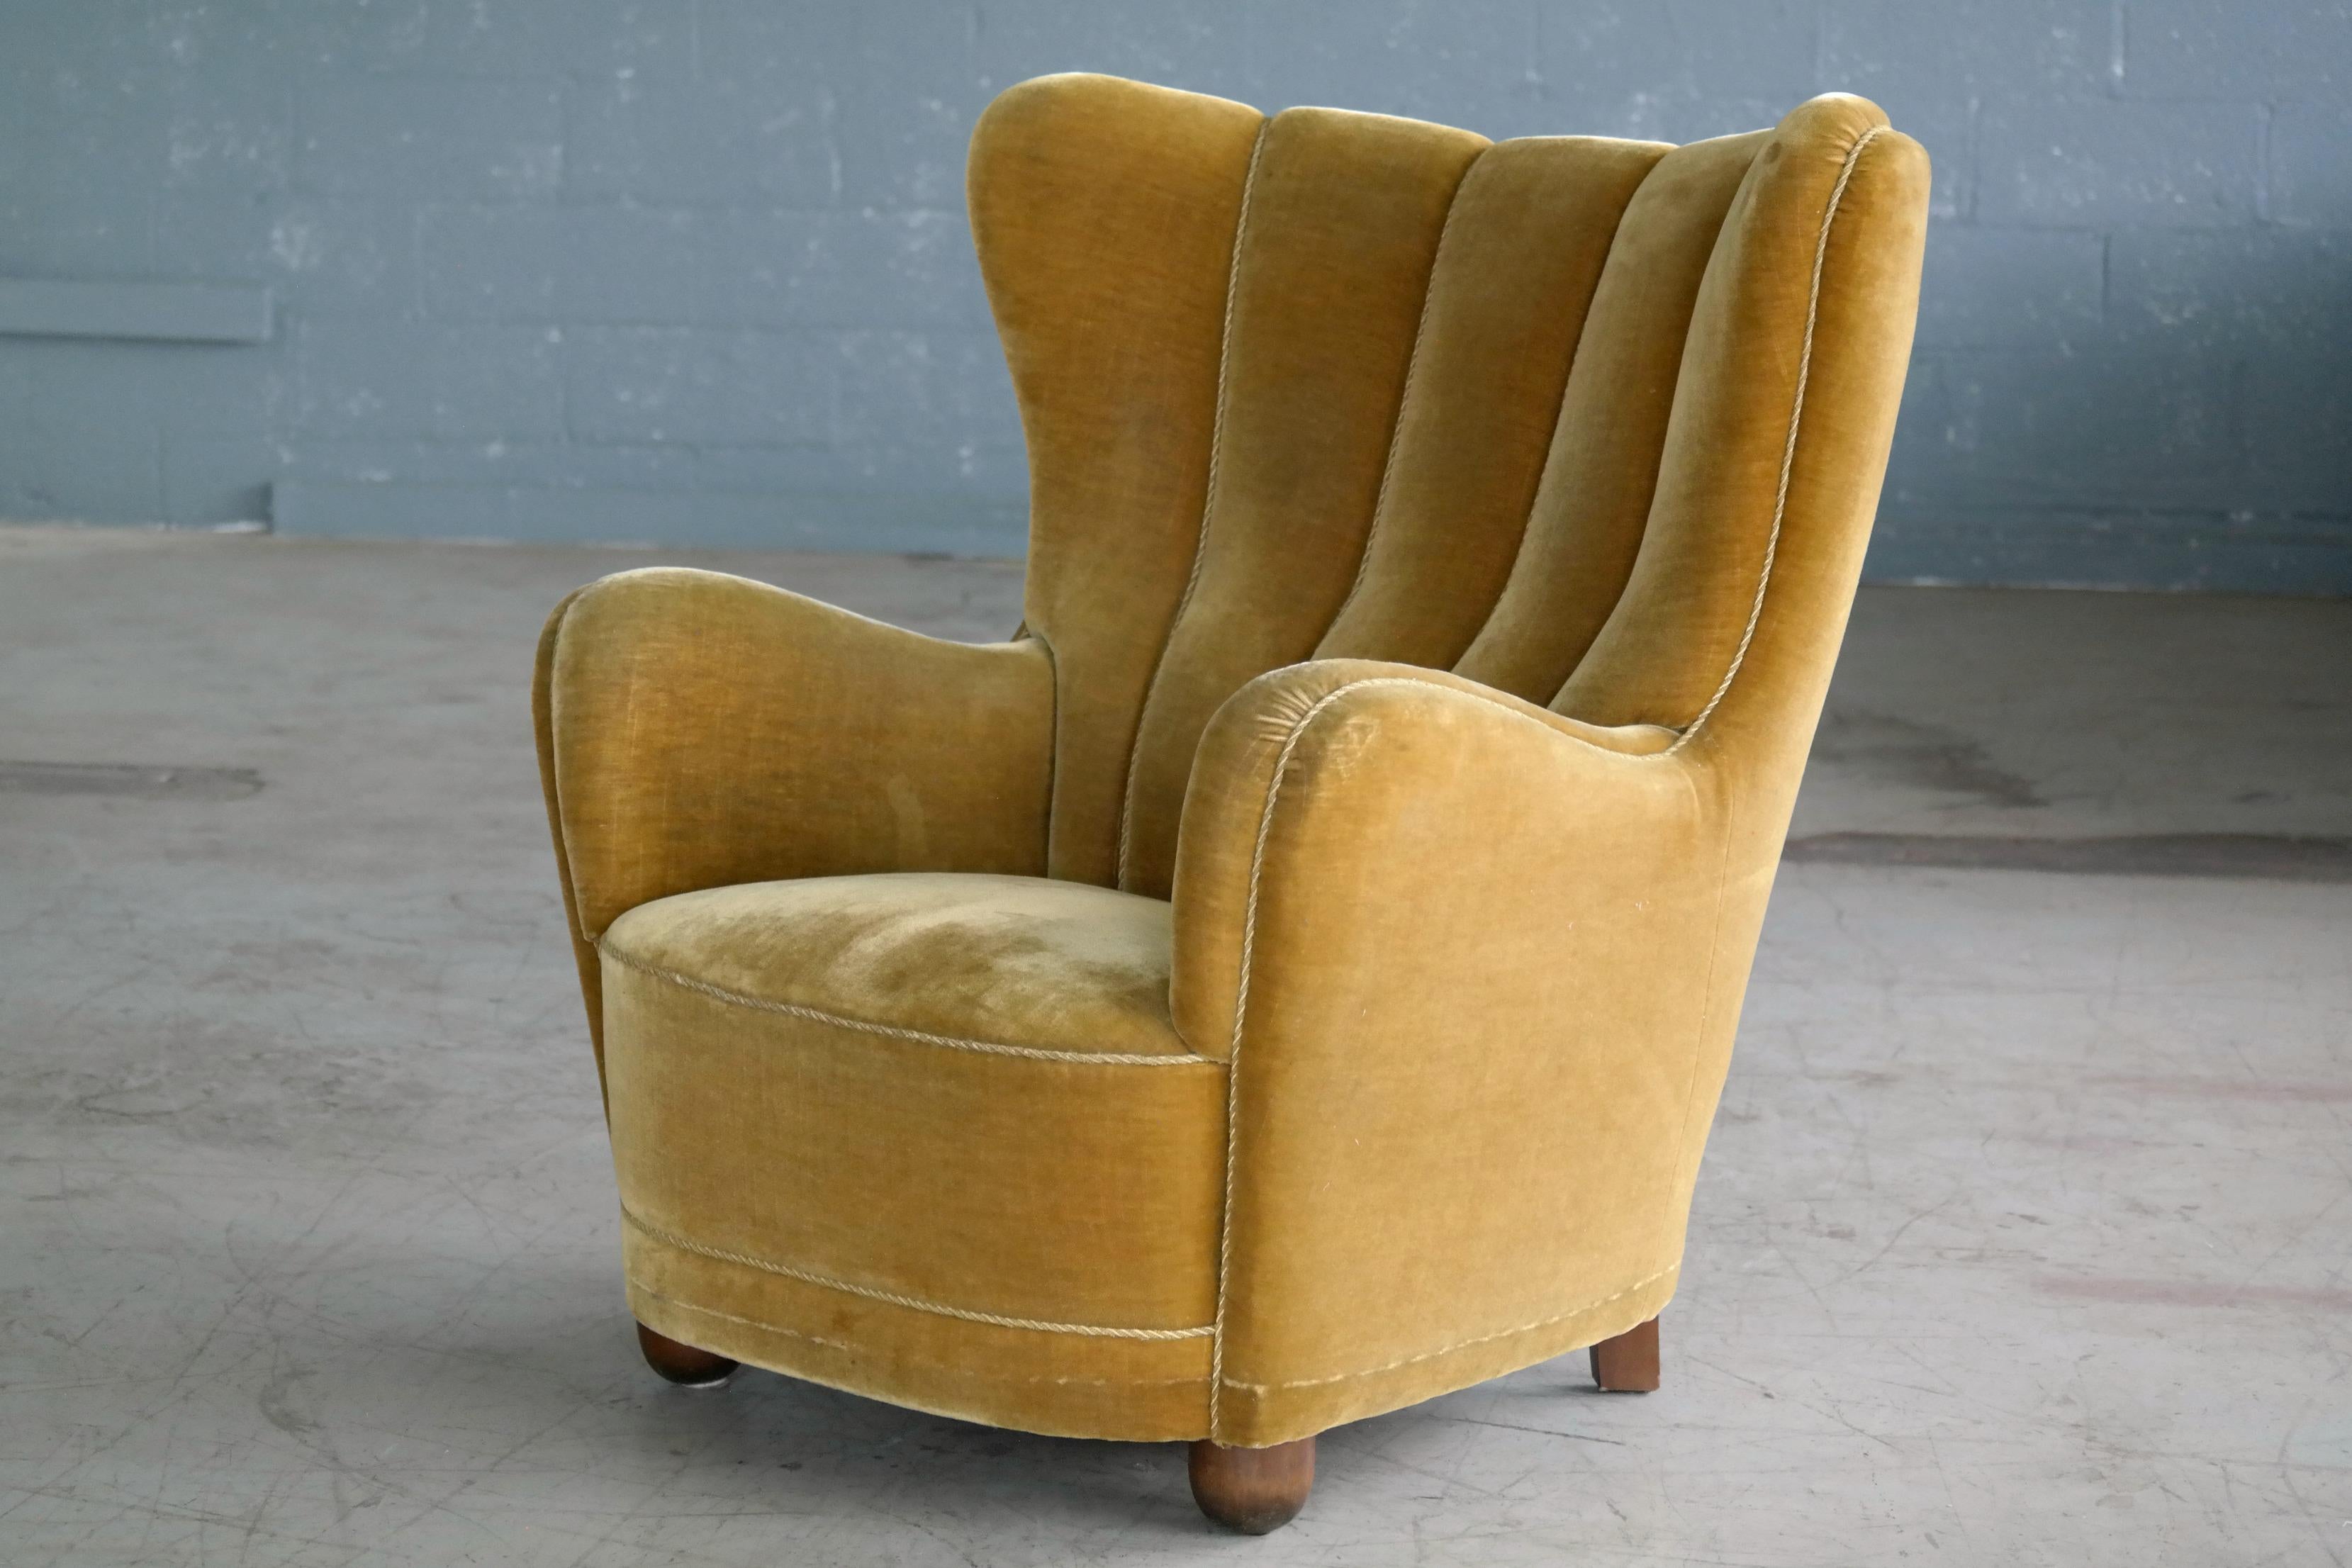 Fantastic Danish 1940s high back armchair with a golden yellow mohair fabric. The chair is much in the style of Viggo Boesen and Flemming Lasssen especially with the ball shaped front legs typical for many of Boesen's designs and the voluptuous yet